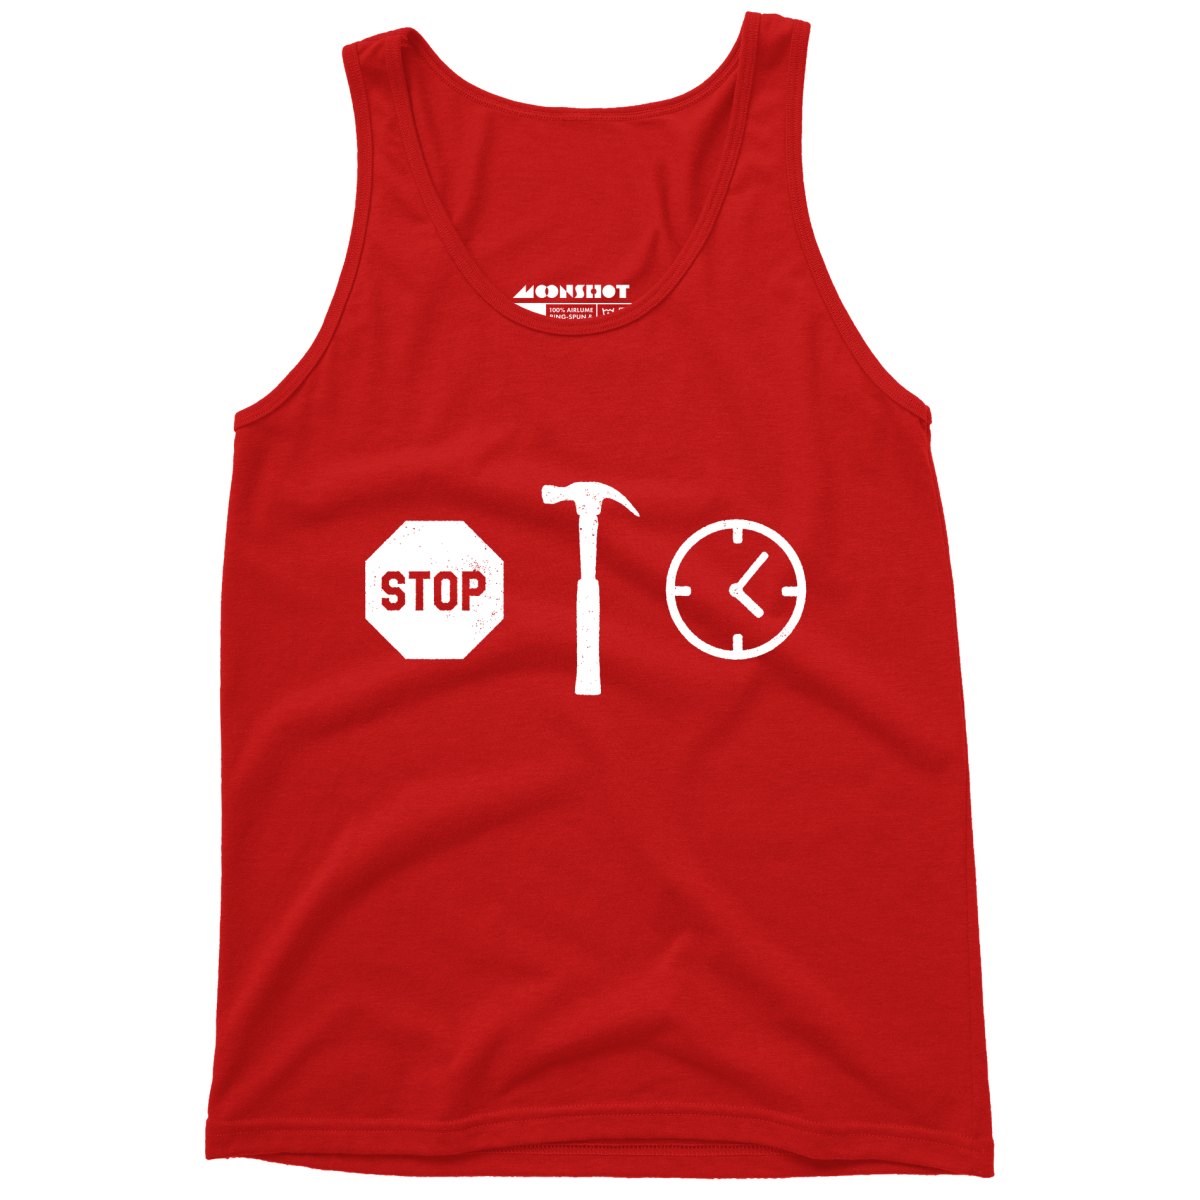 Stop! Hammer Time - Unisex Tank Top